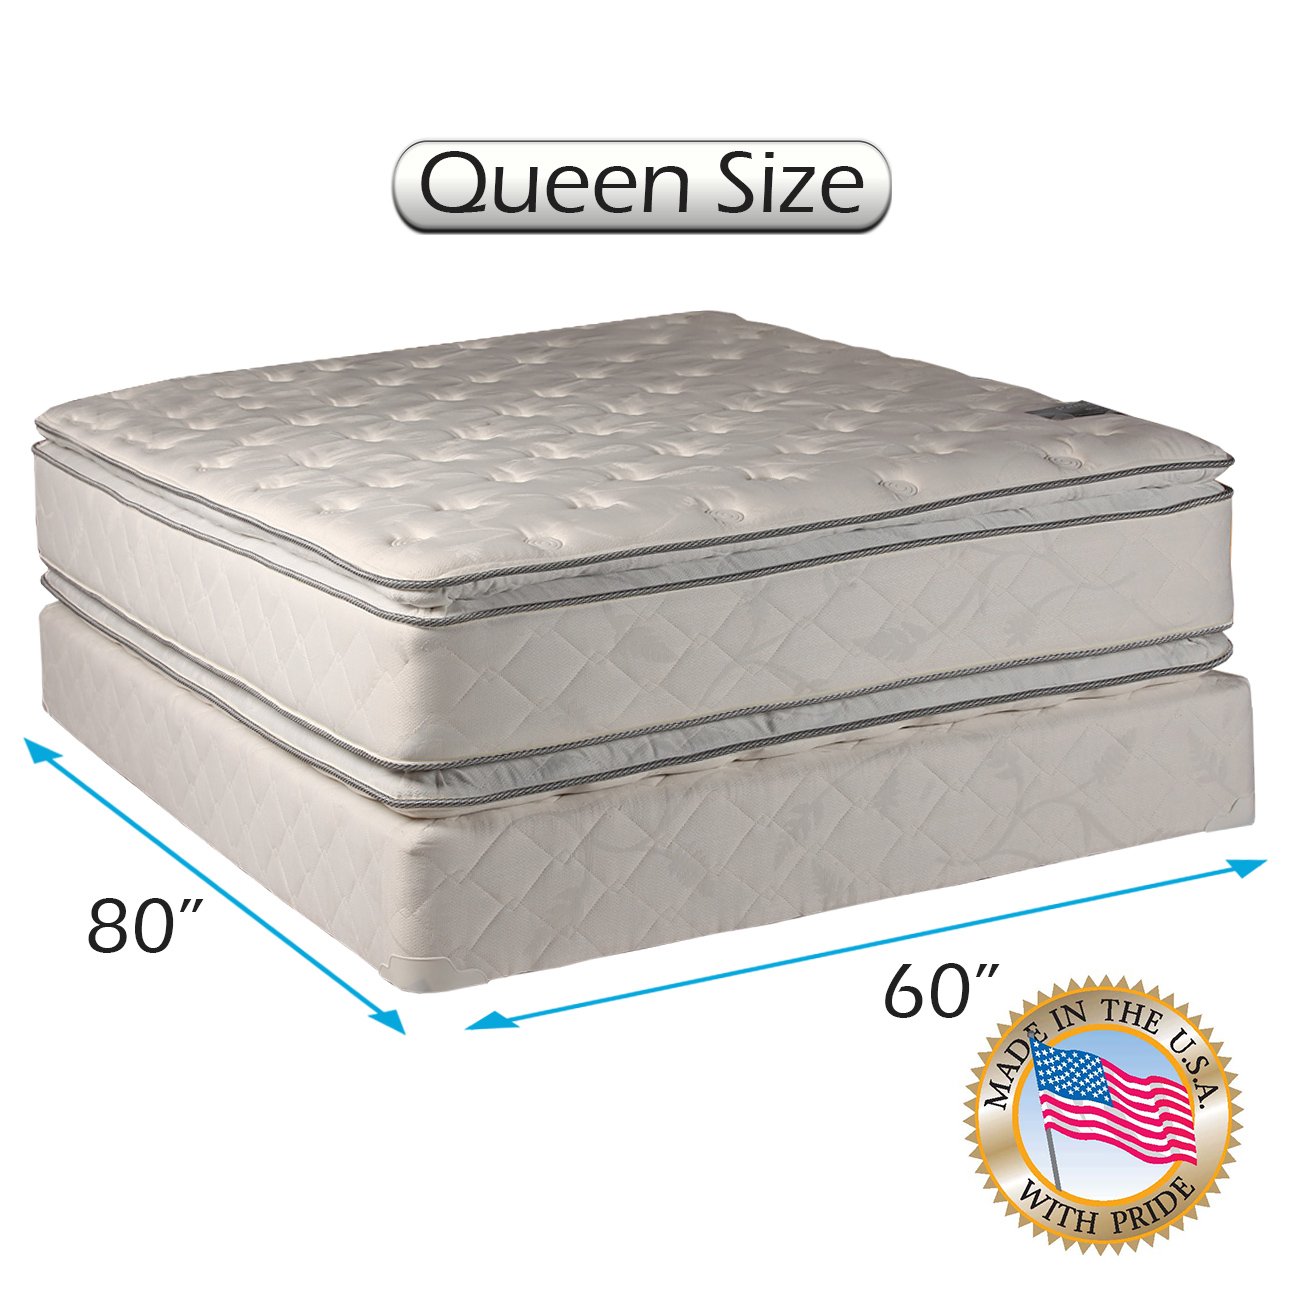 Dream Solutions USA Princess Dream Plush Queen Size Firm Mattress and Box Spring Set (PillowTop) - Fully Assembled, Orthopedic, 